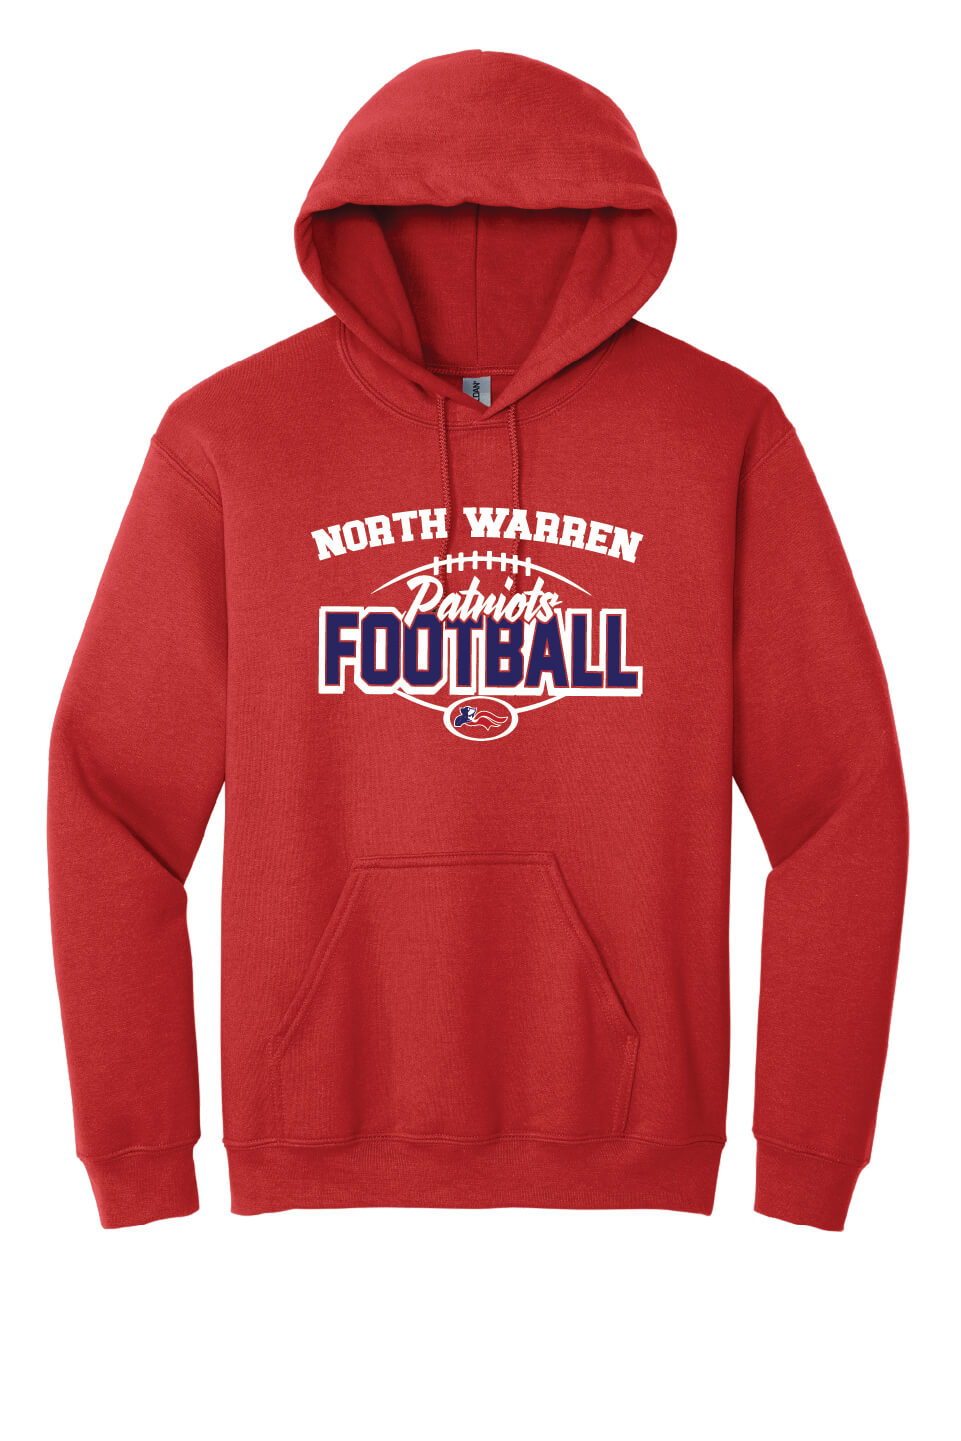 NW Patriots Football Hoodie (Youth) red